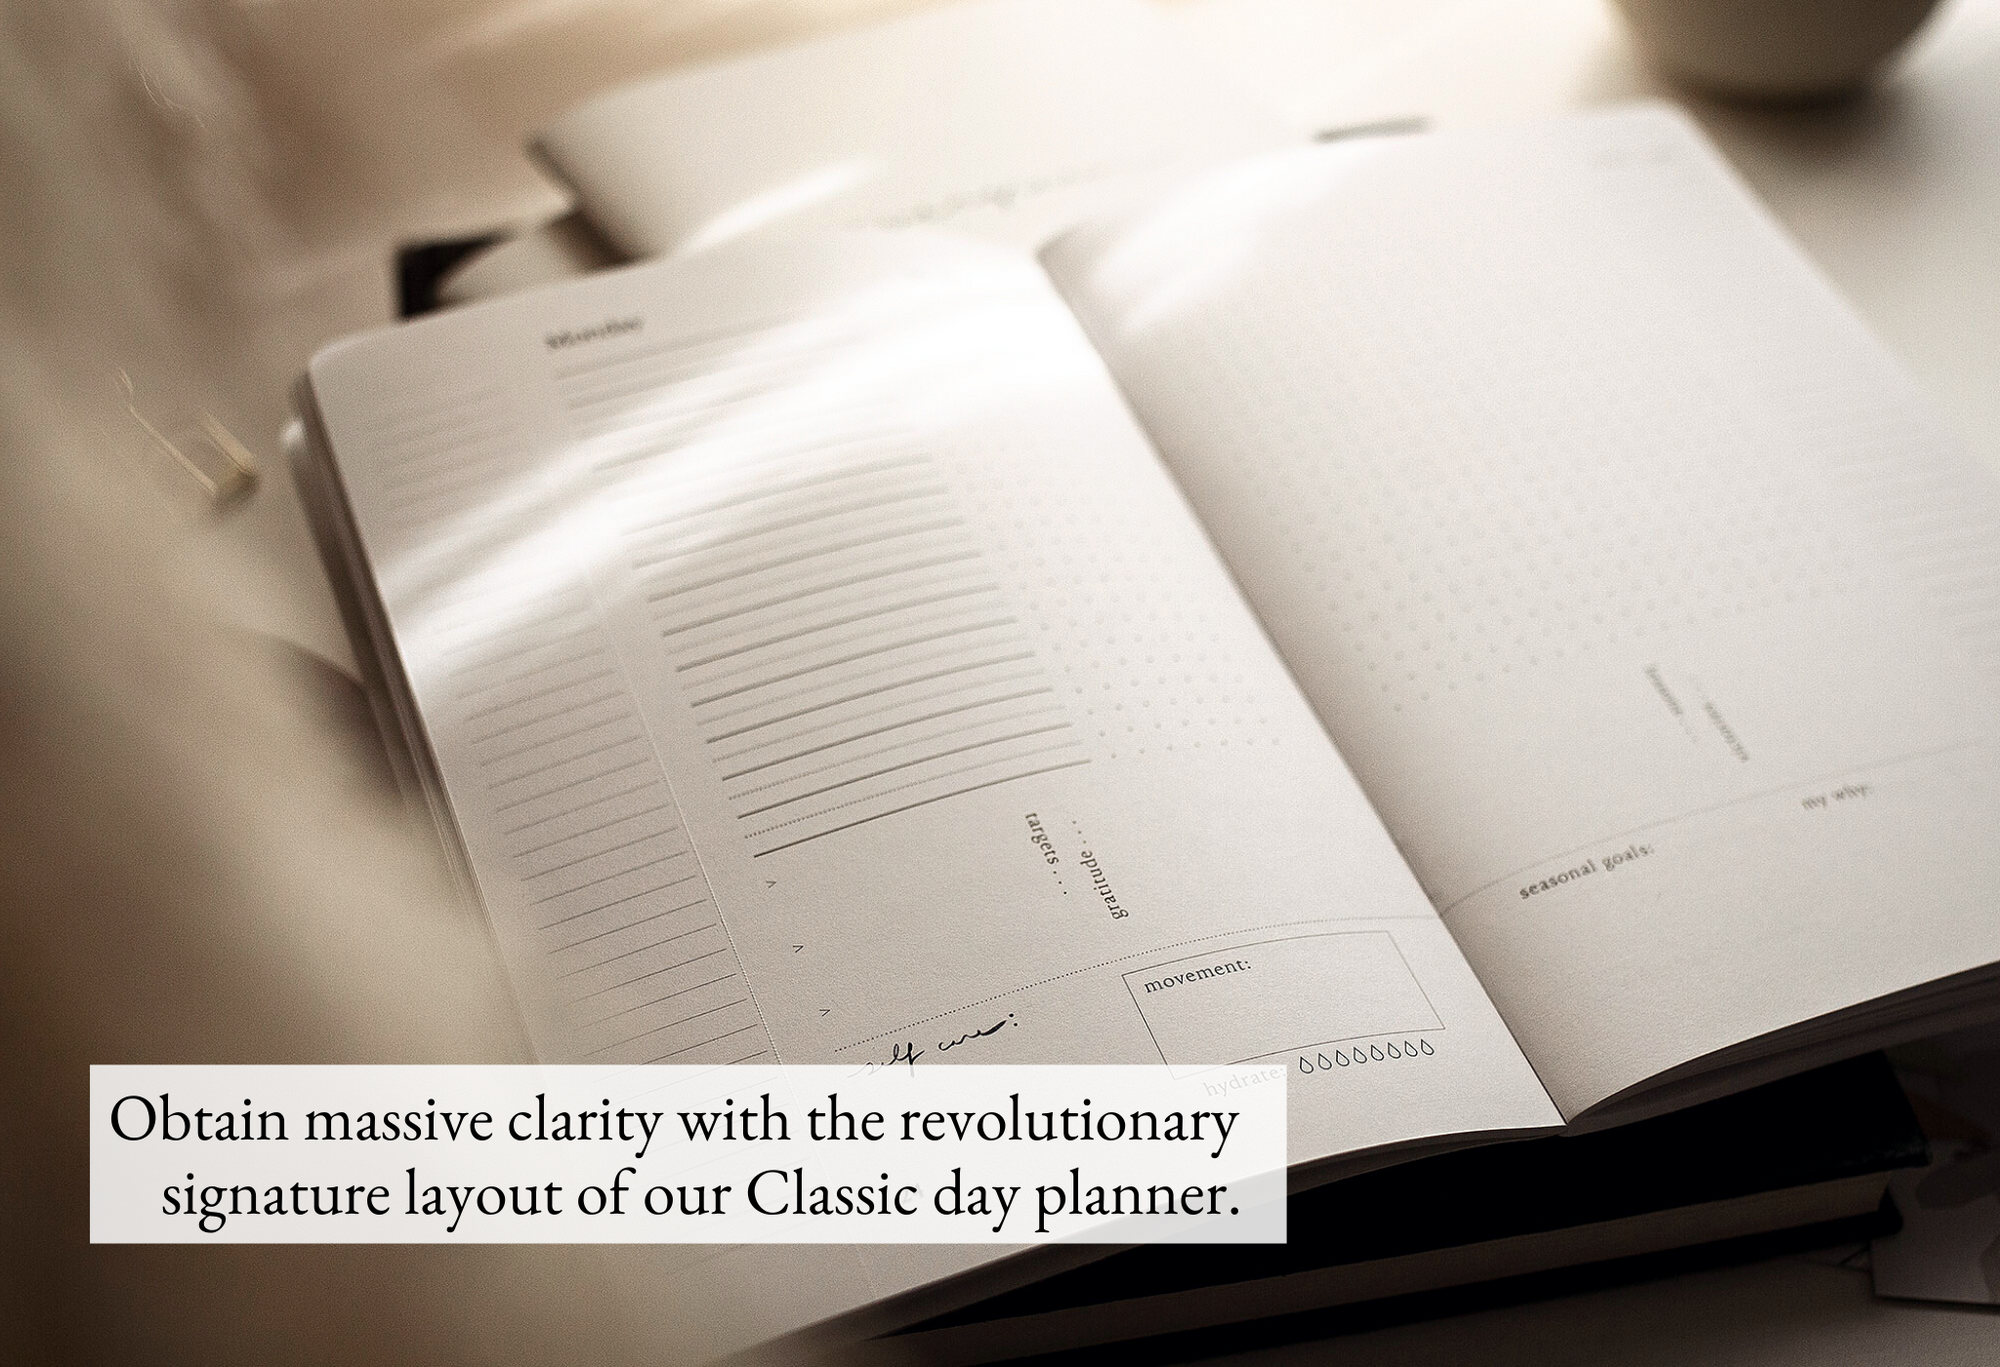 the Classic Day Planner